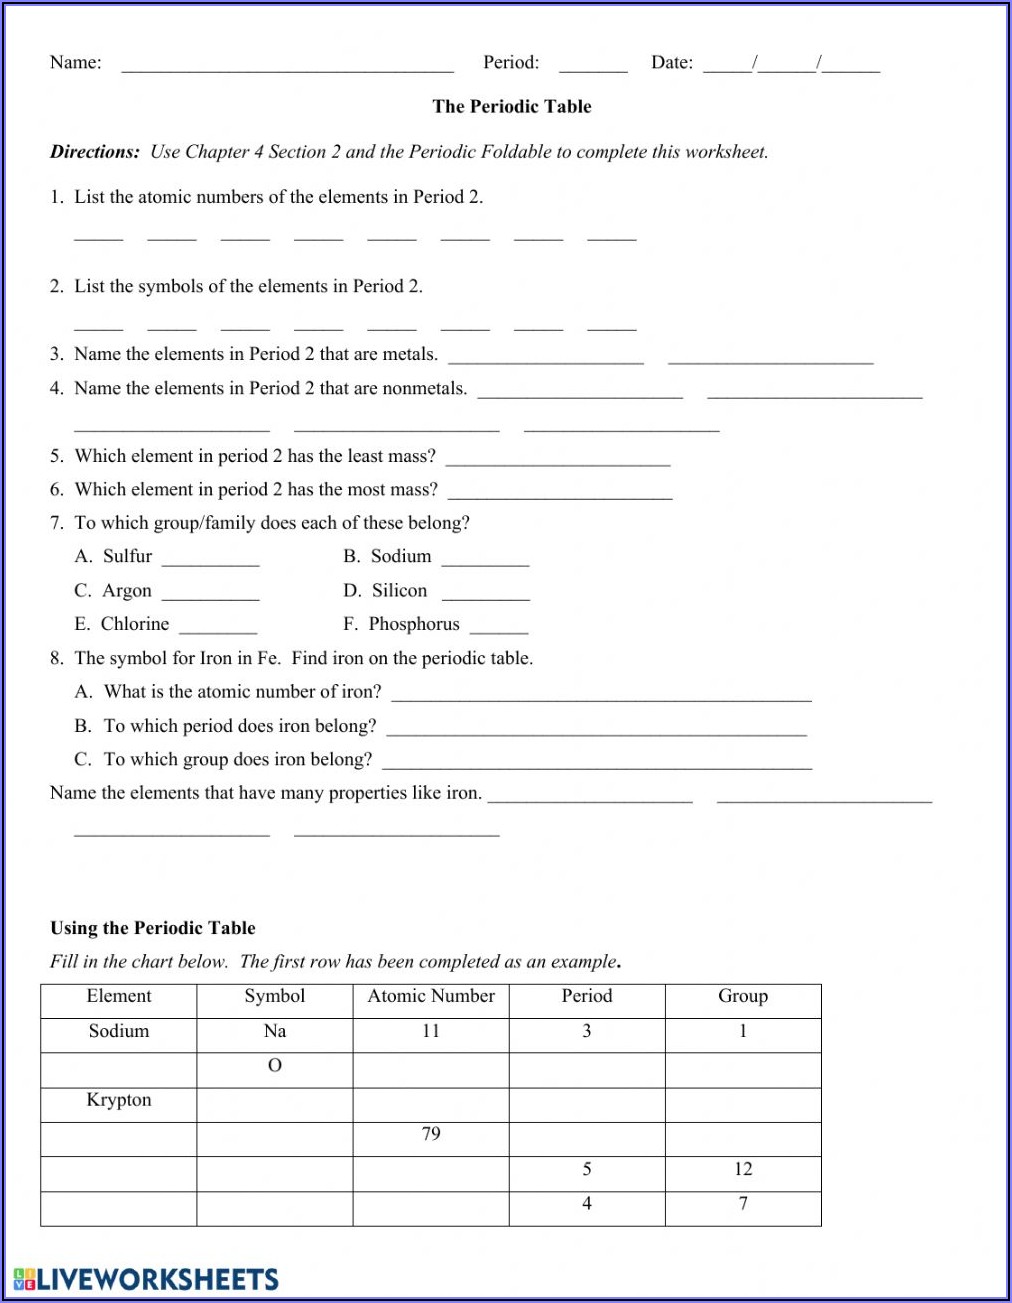 Living Periodic Table Worksheet Answers